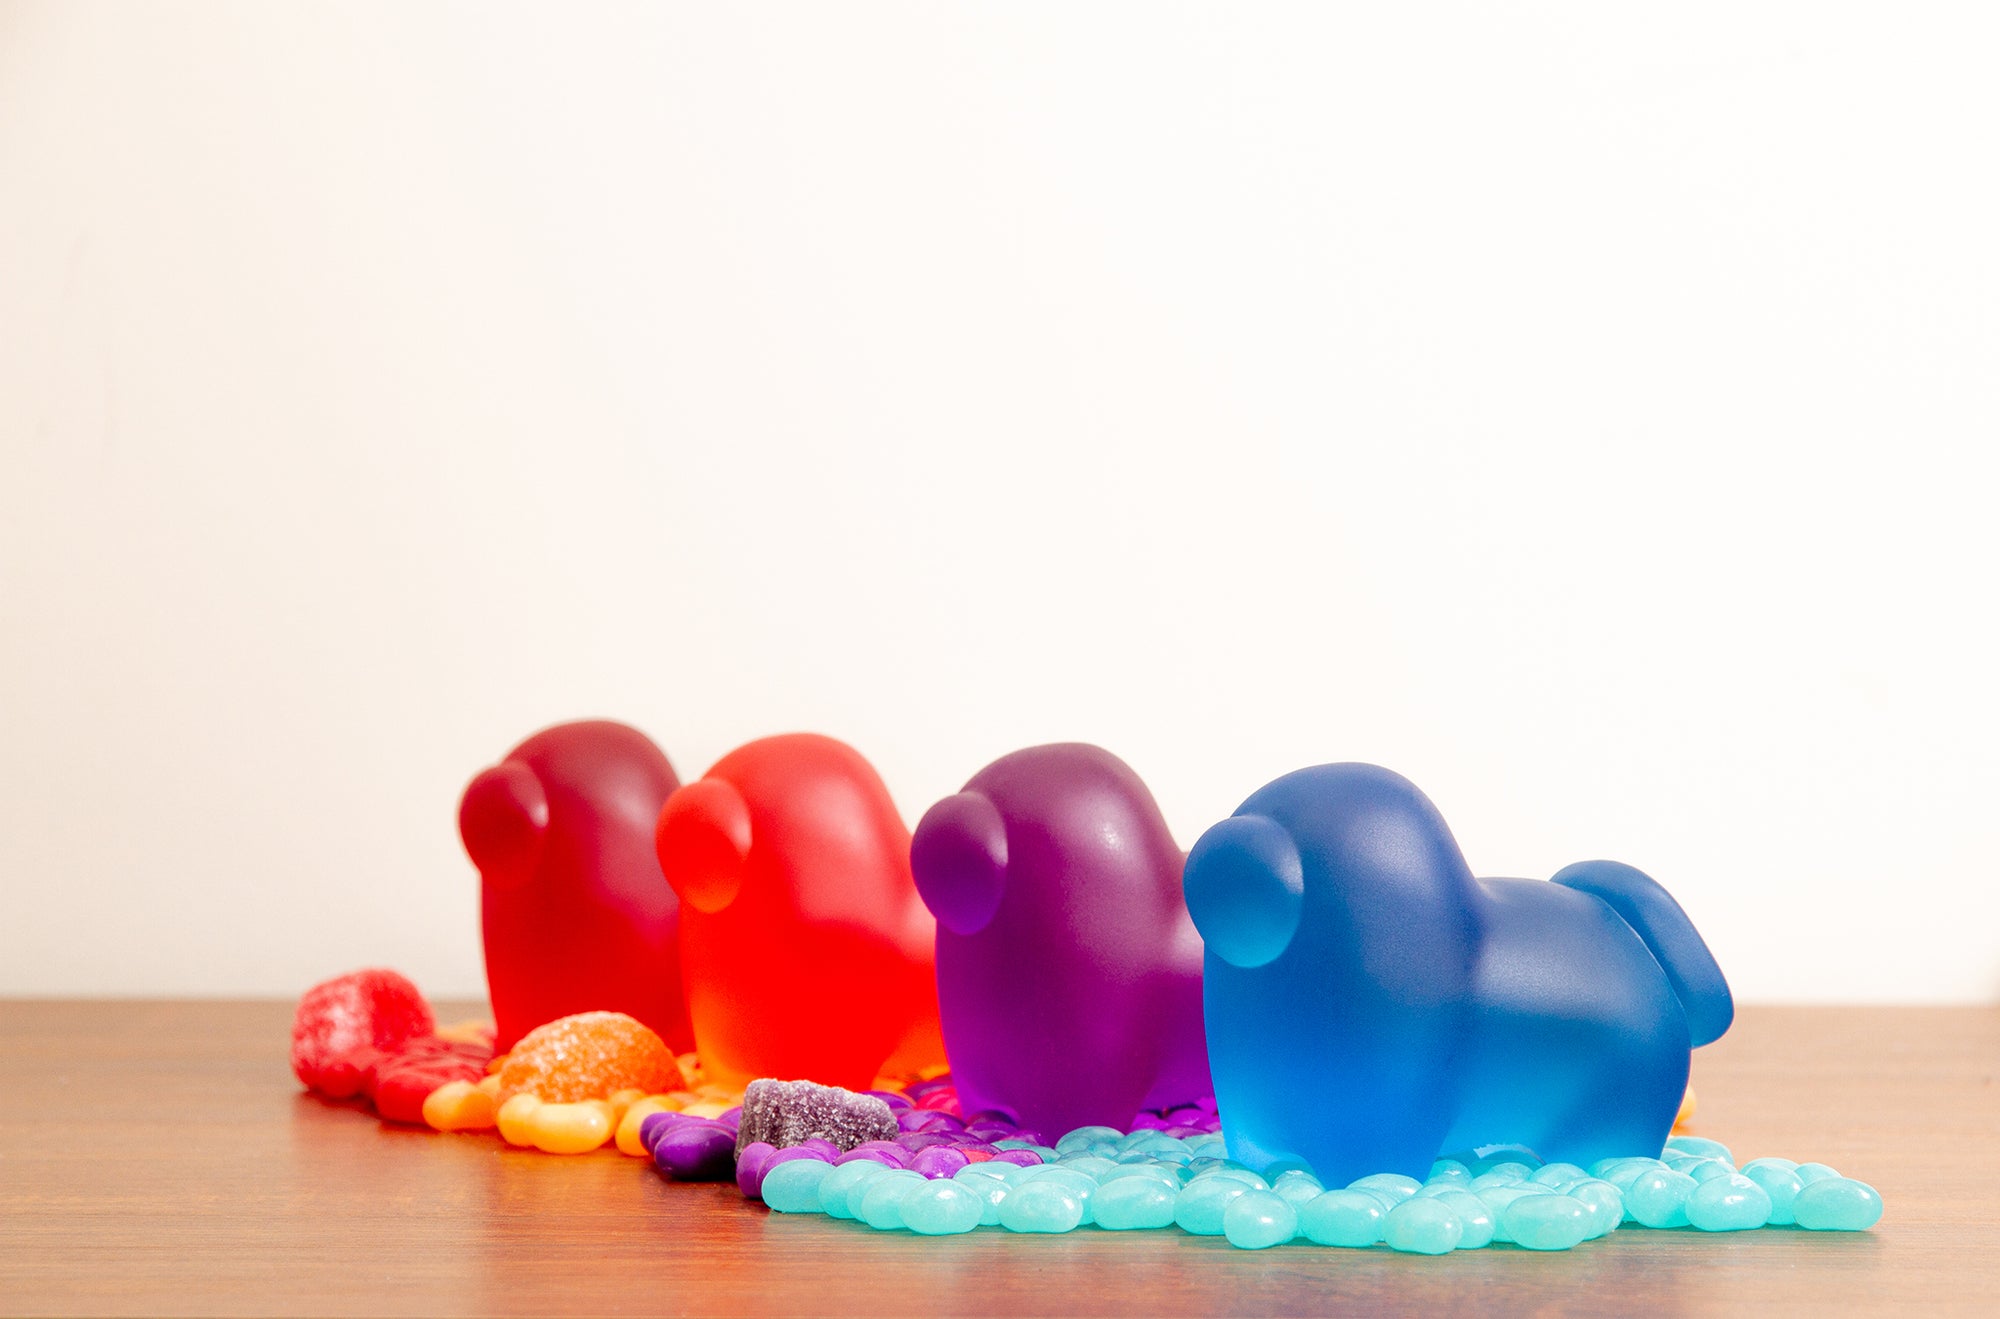 A diagonal shot of the Four Horse-shaped Crewmate figurines, red, orange, purple, and blue, standing on top of jellybeans that match their respective colors.